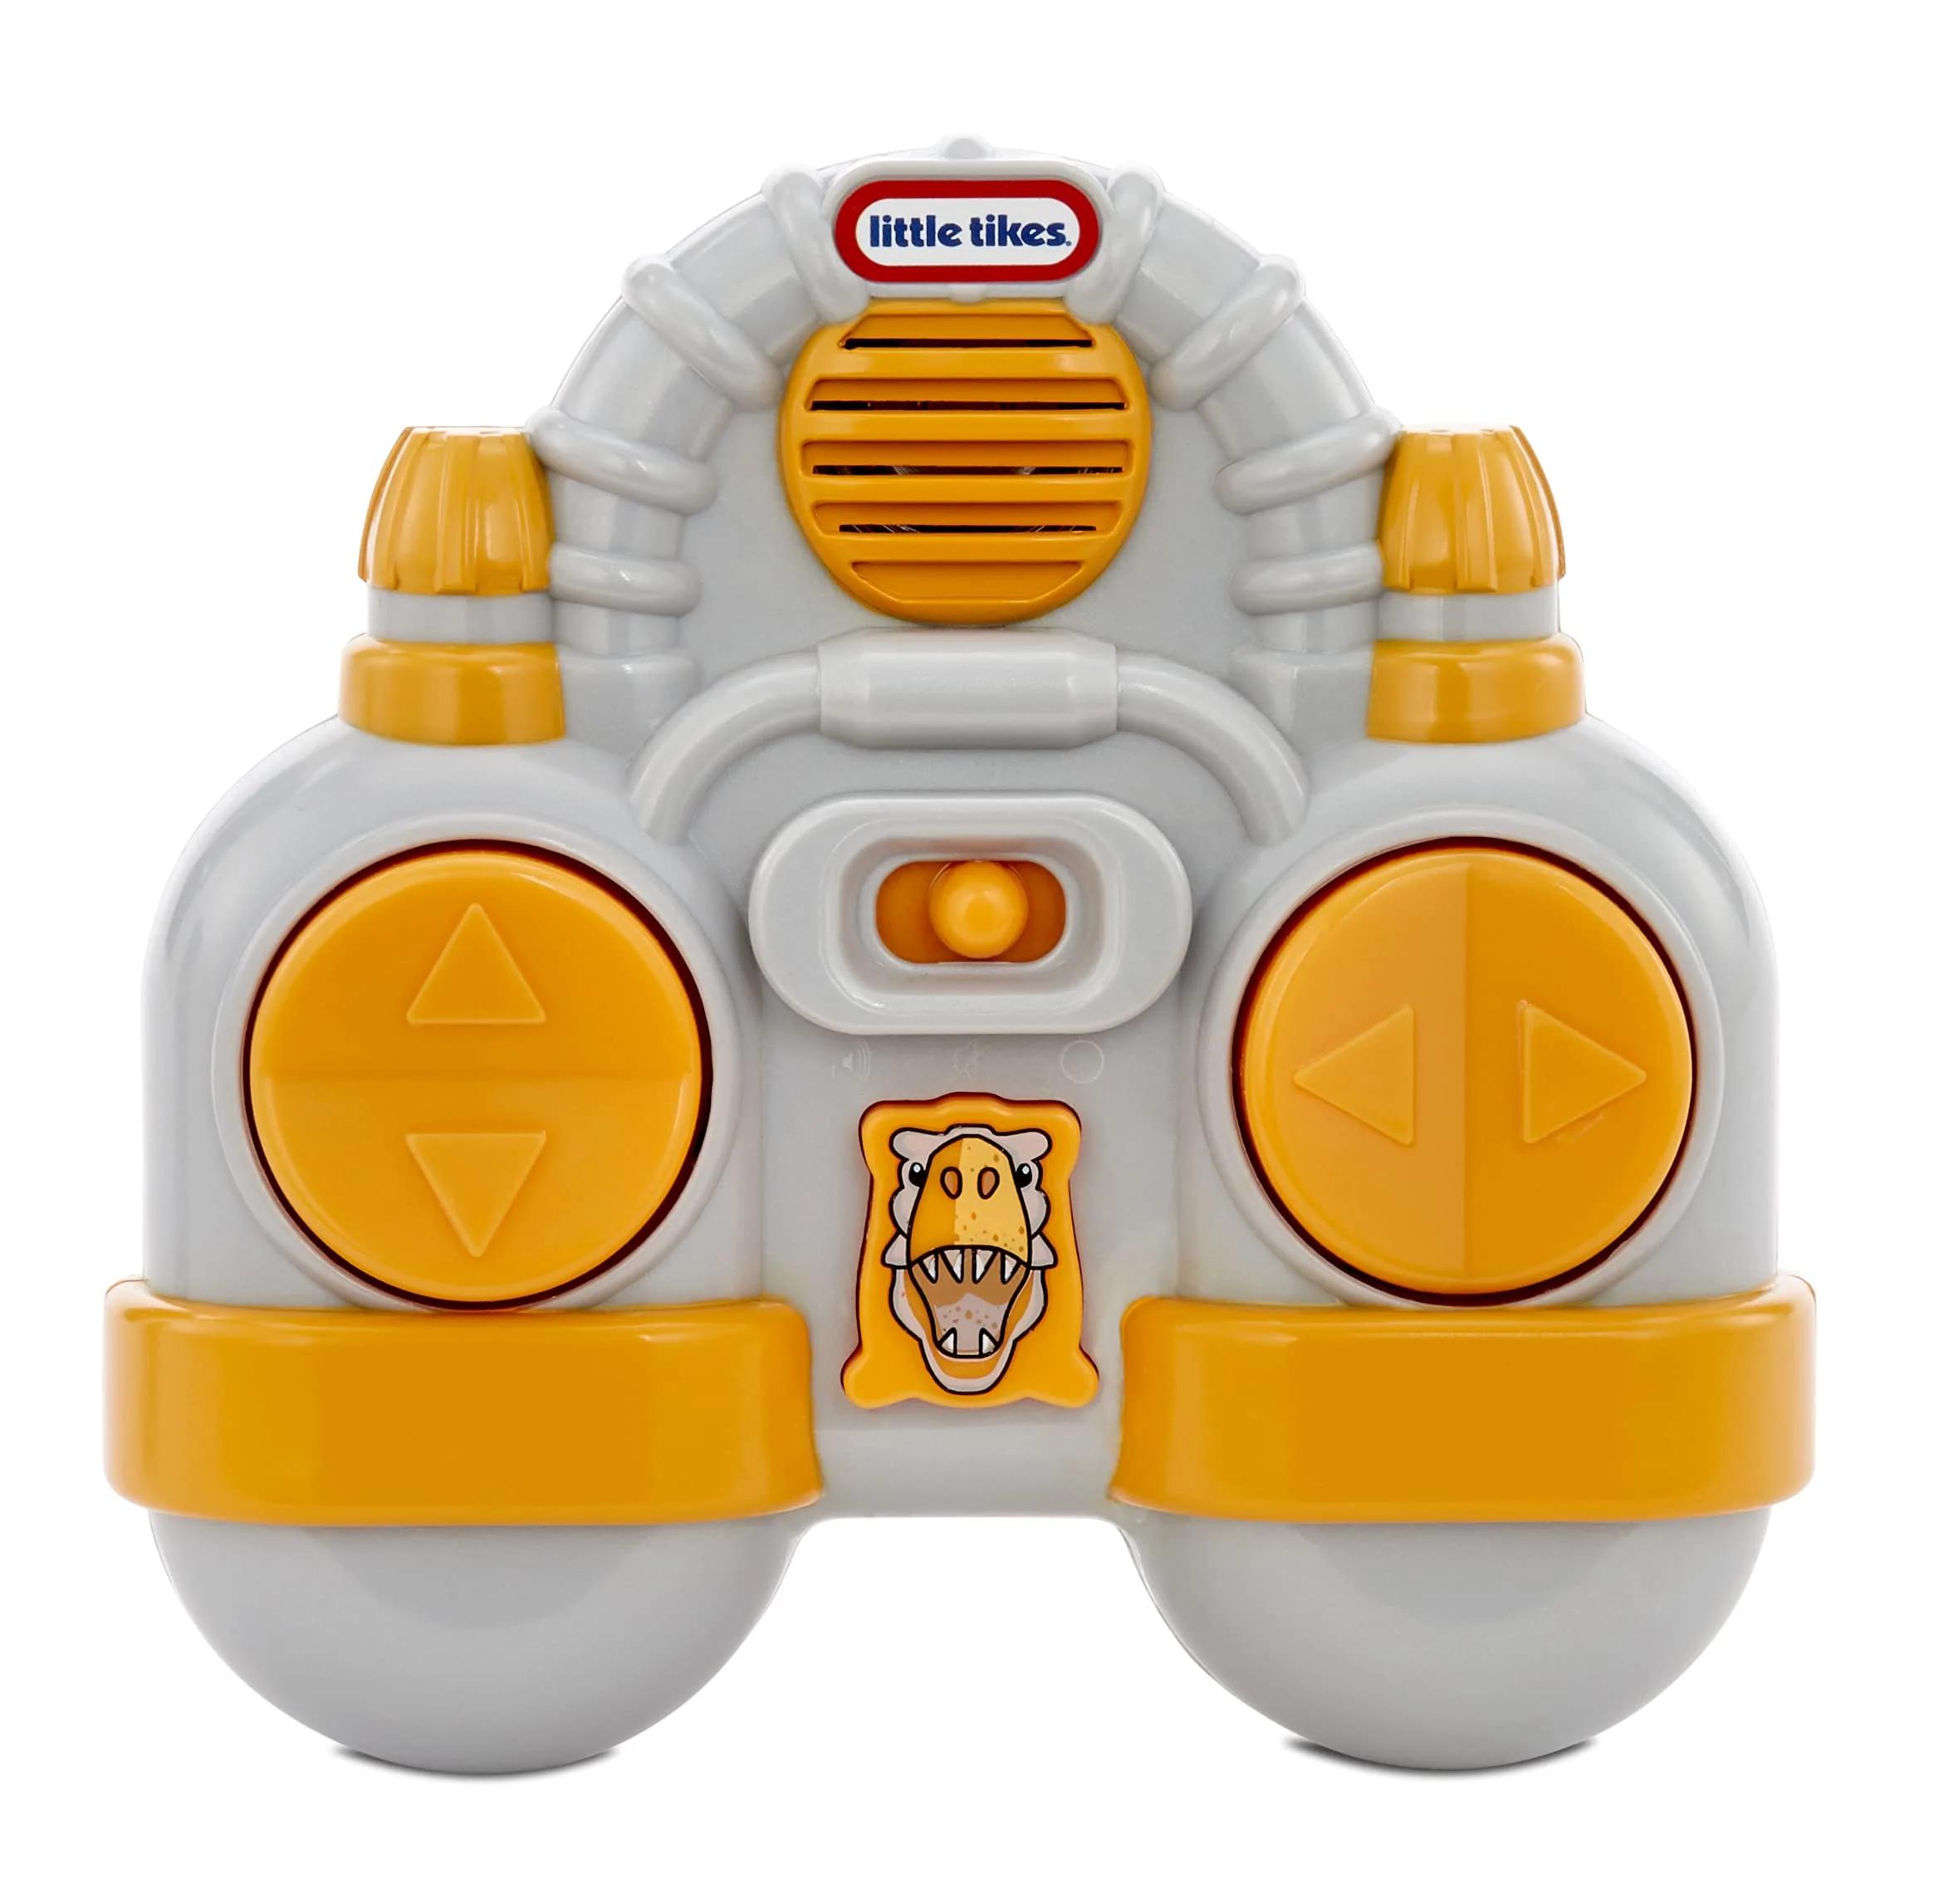 Little Tikes Remote Control: 'Key Features'